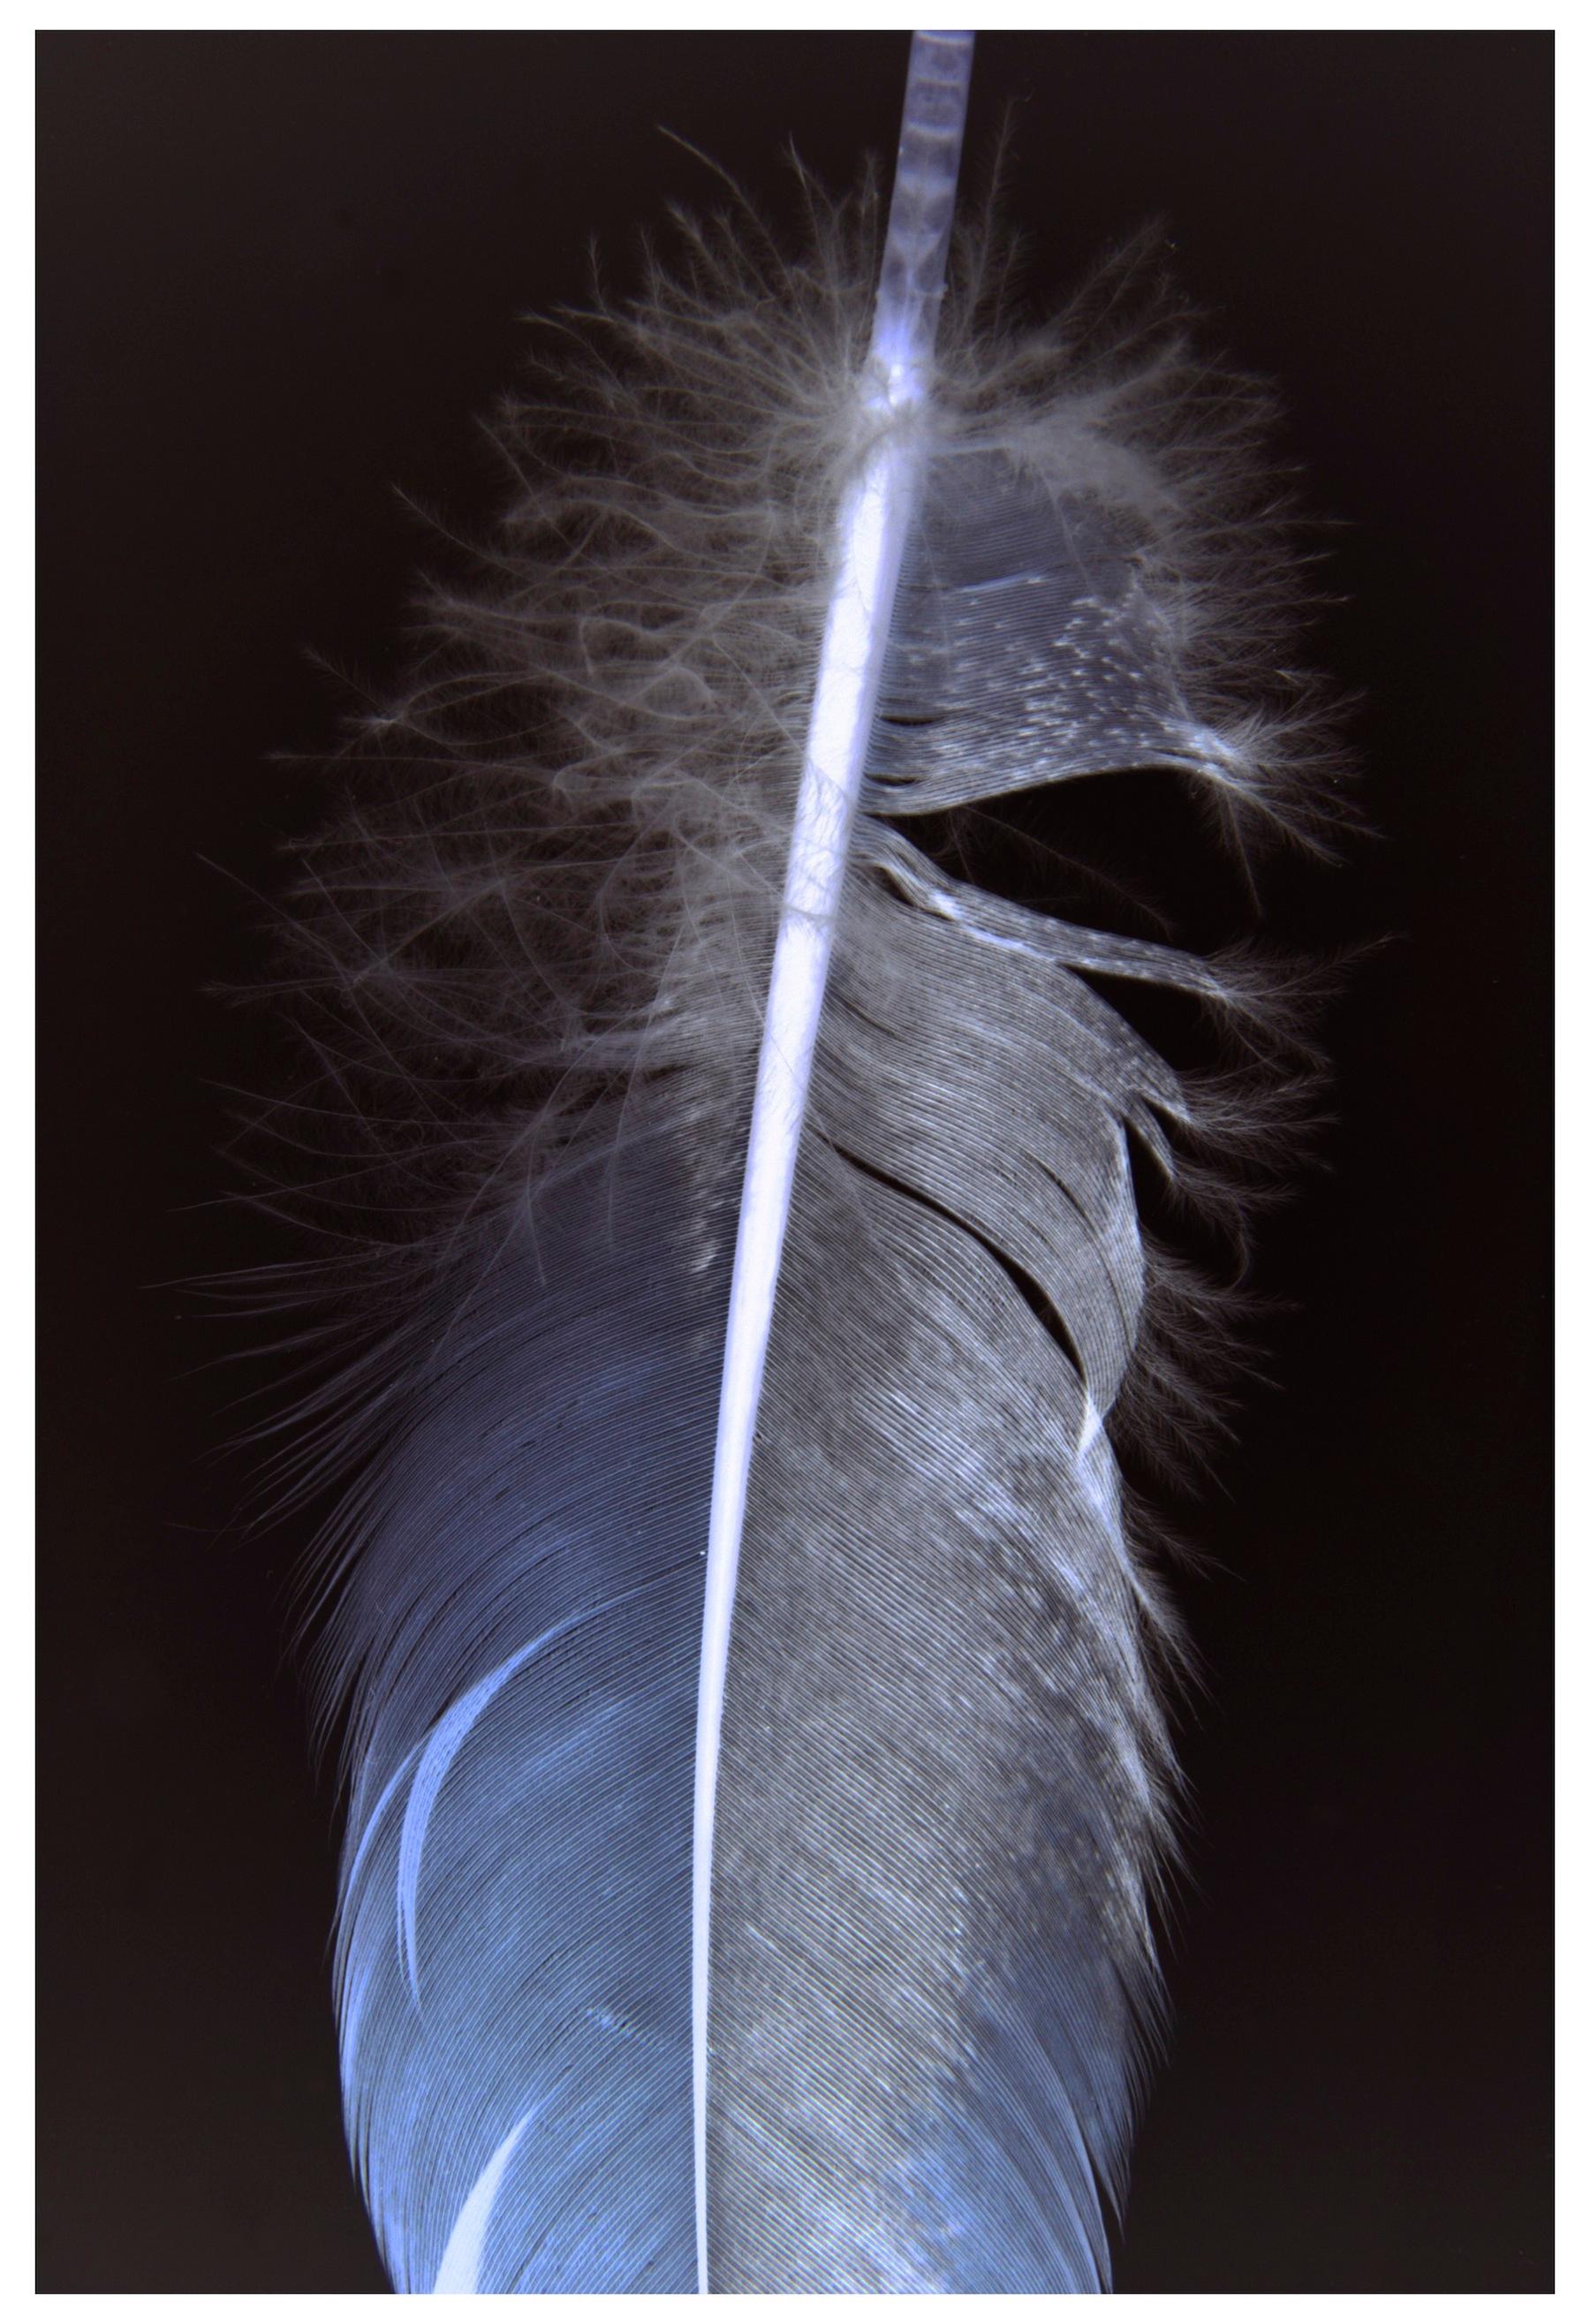 Feathers Three, Vertical Still Life Photograph of White Feather on Black